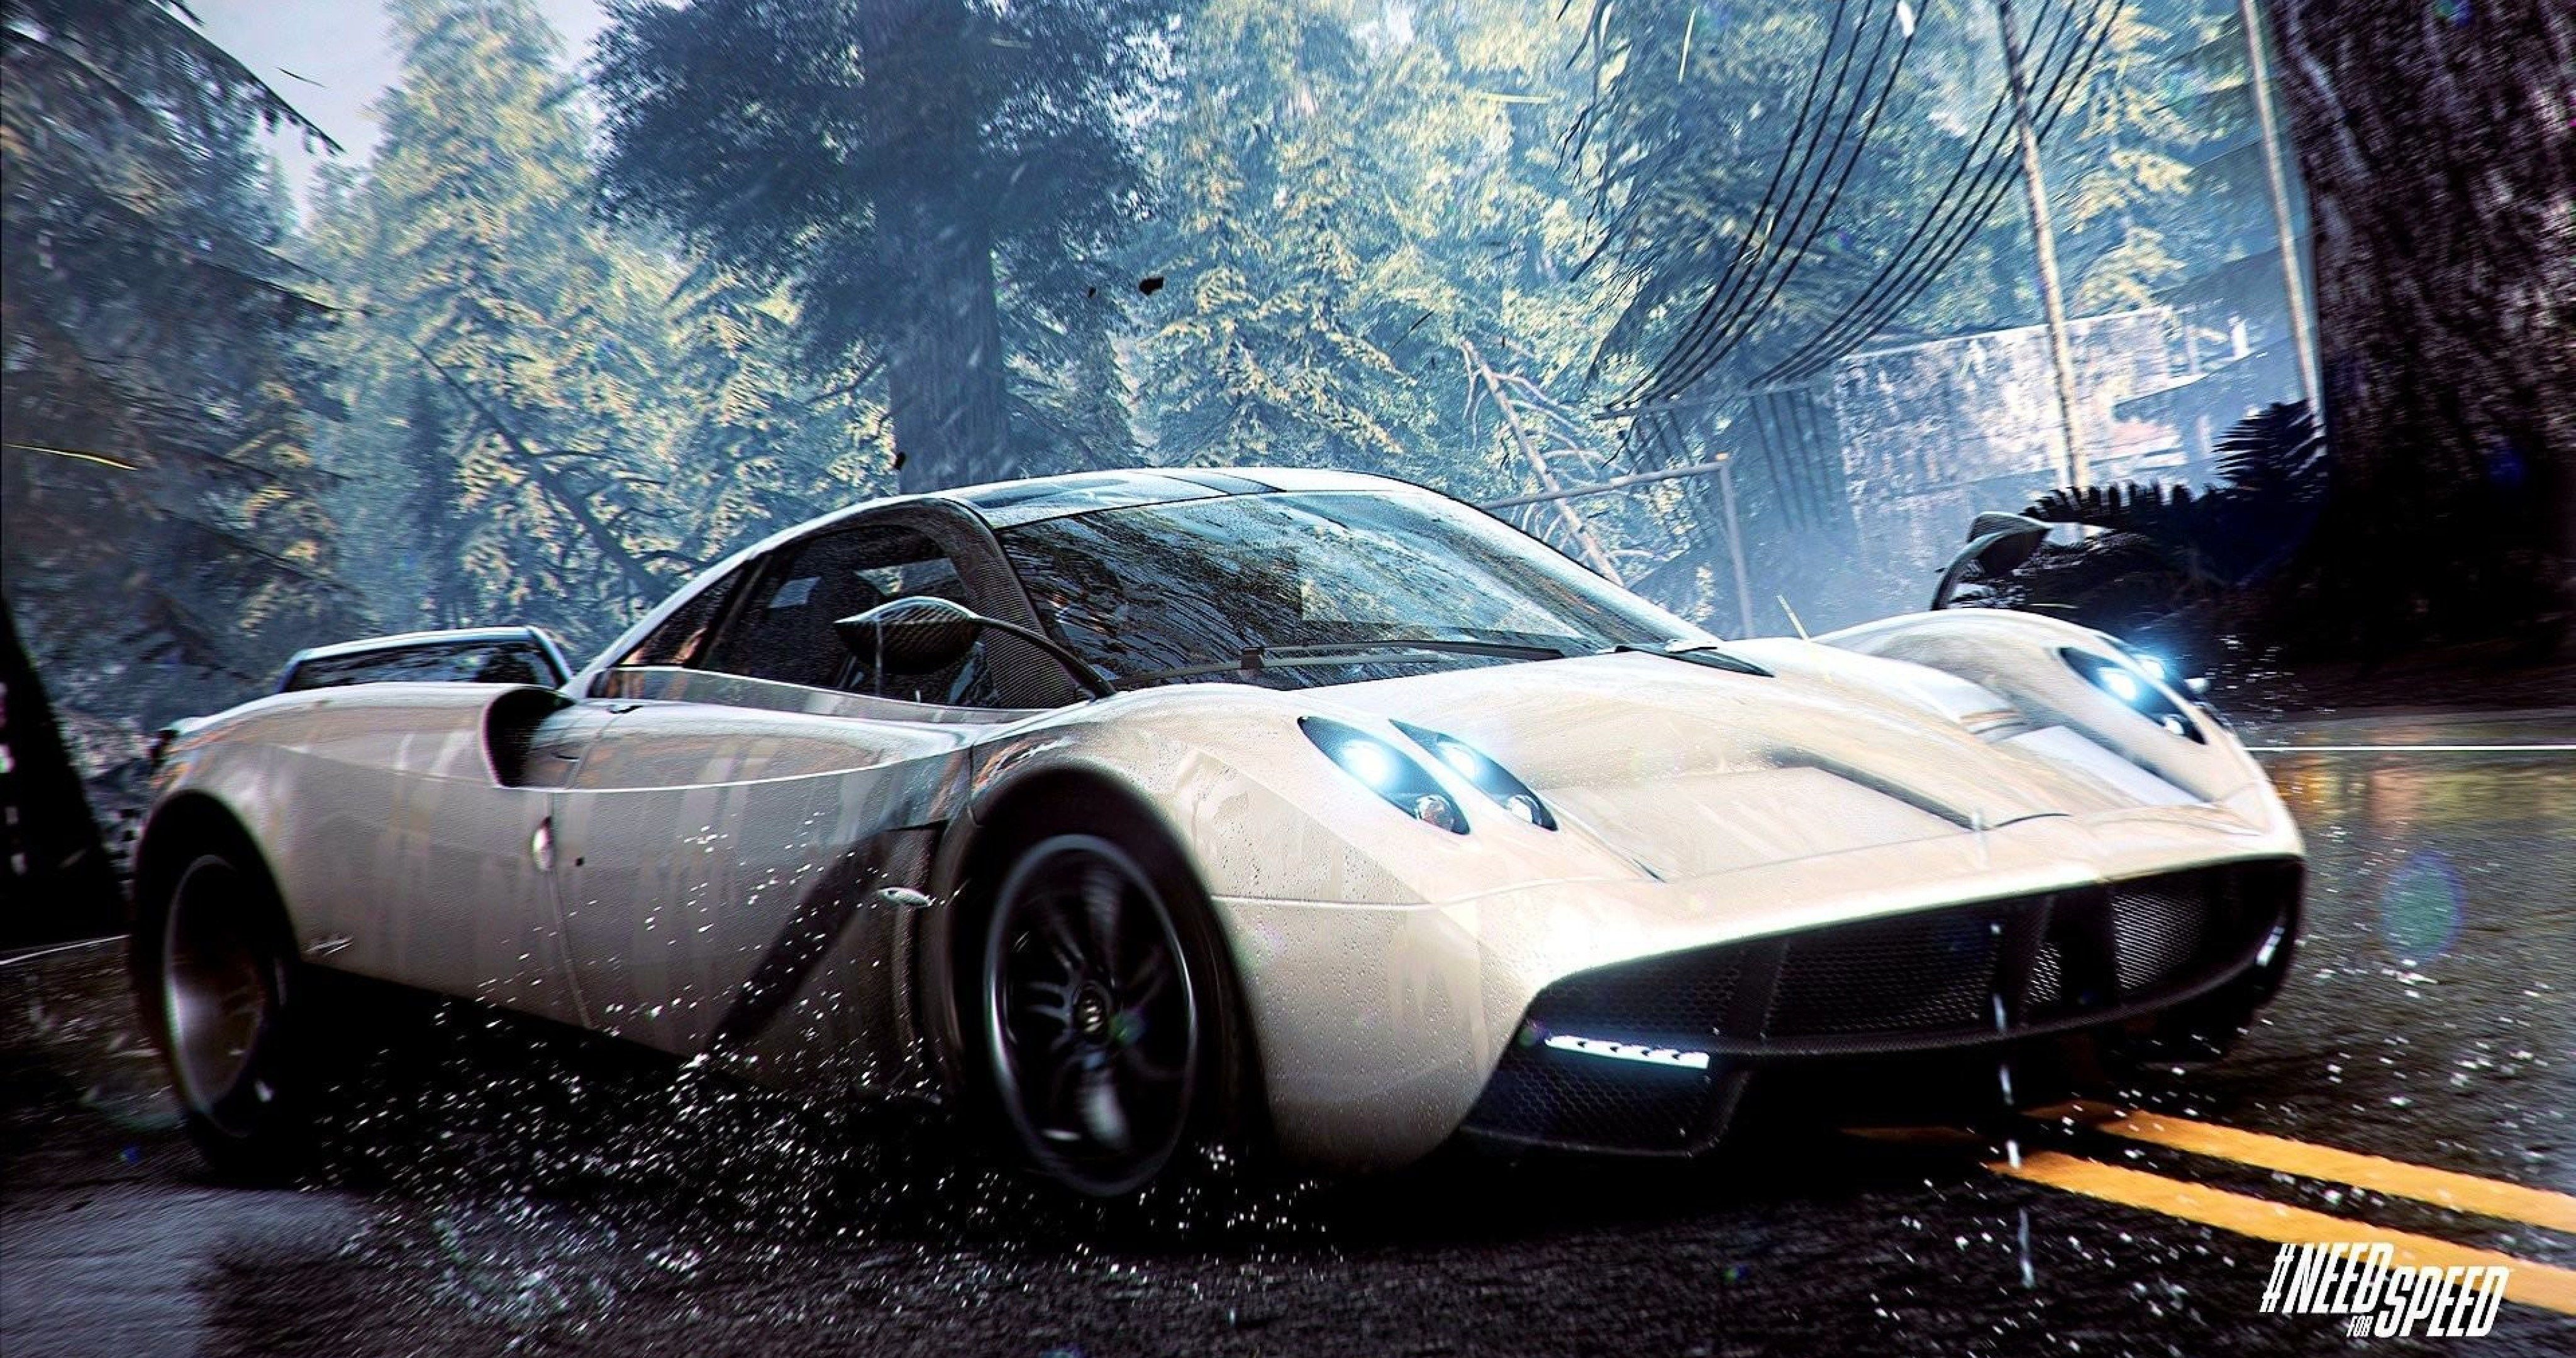 need for speed rivals 2013 4k ultra HD wallpaper. Need for speed rivals, Need for speed, Koenigsegg